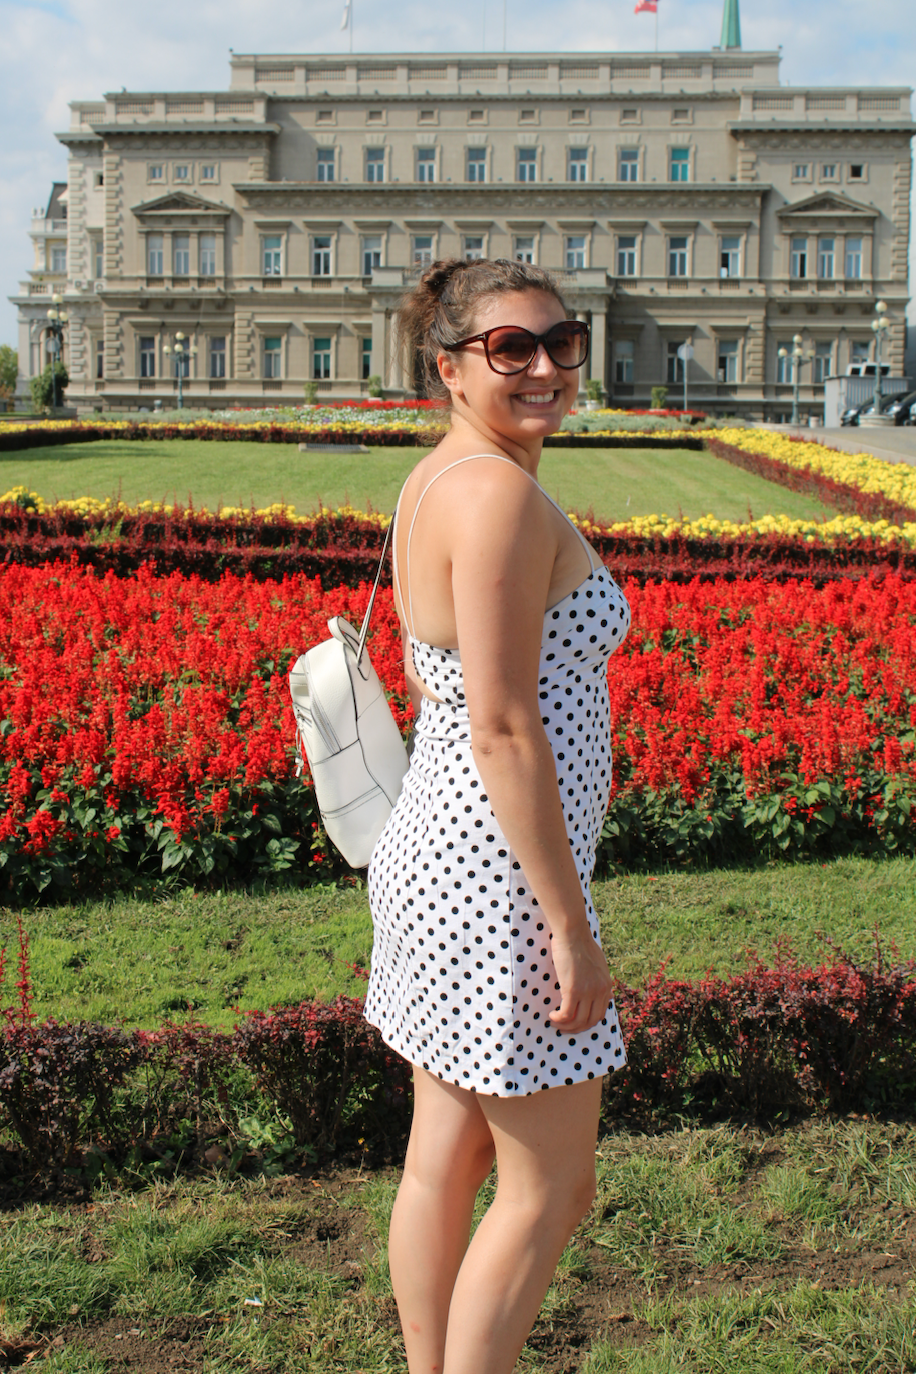 visit belgrade - Nell stood outside an official looking building with colourful flowers behind her 